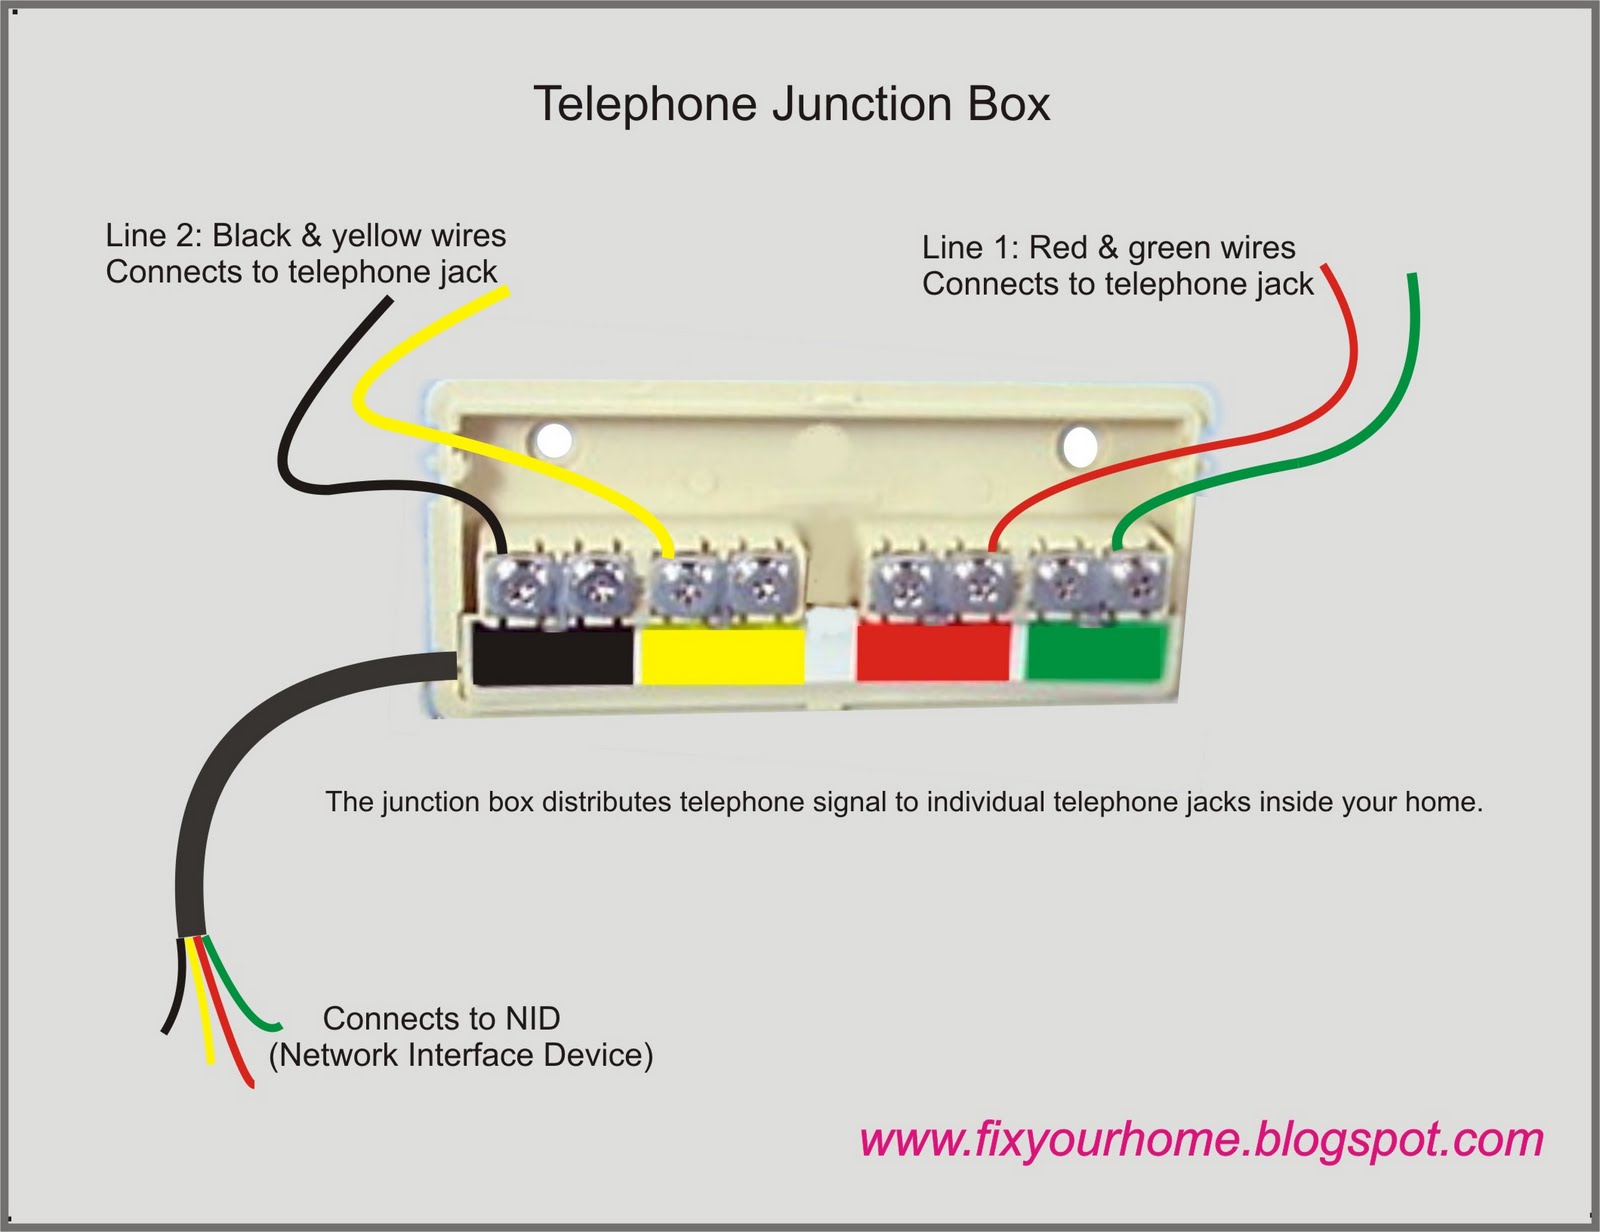 Diagram Dsl Wiring Diagram Telephone Box Full Version Hd Quality Telephone Box Logicdiagram Ladolcevalle It